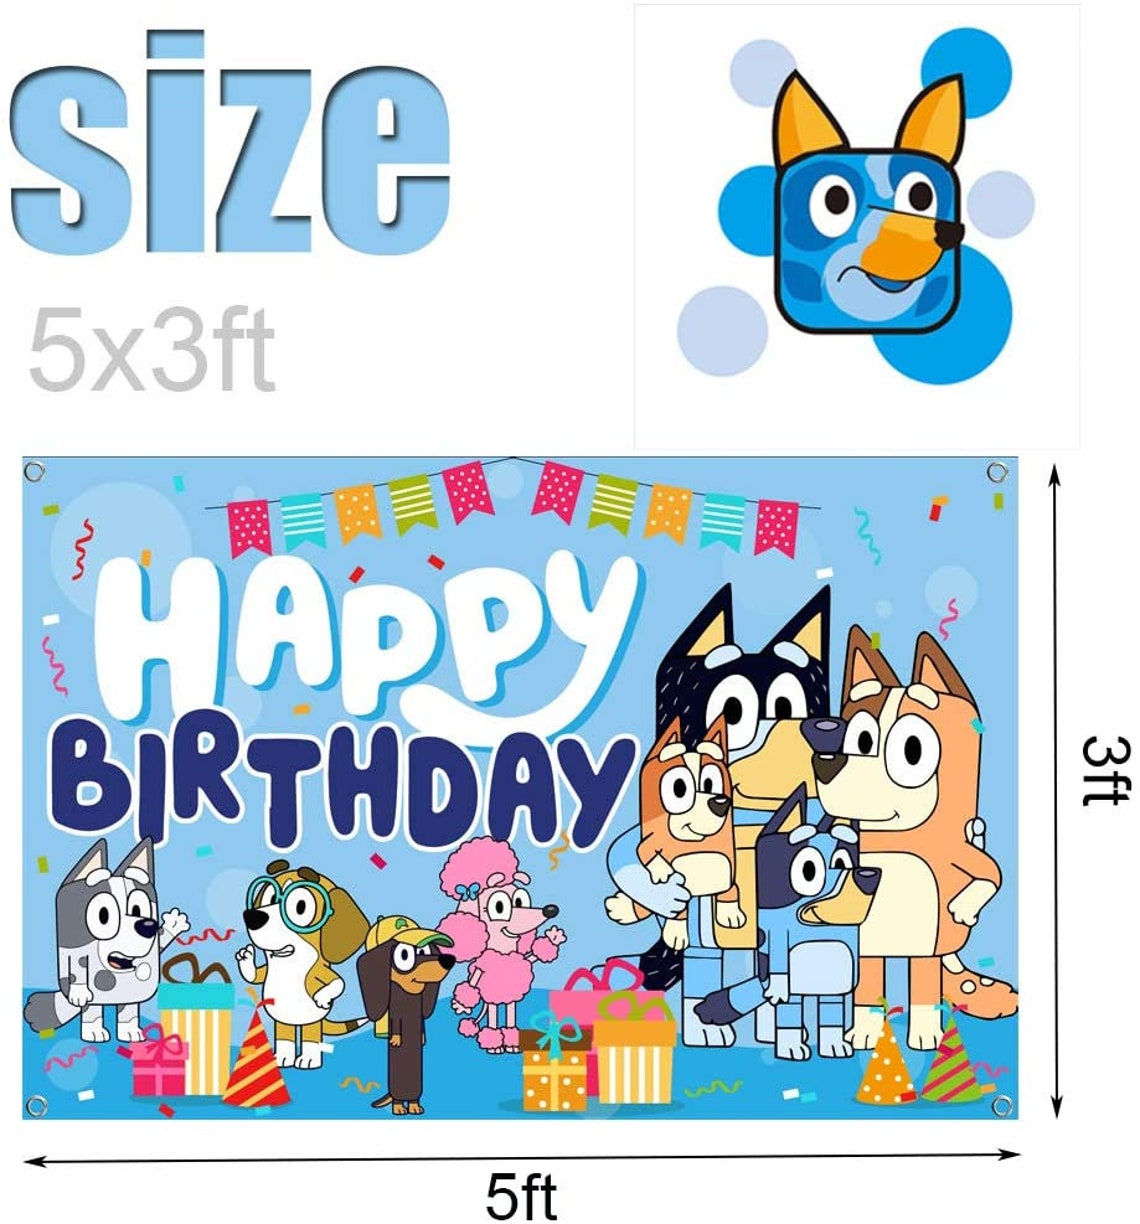 bluey birthday wishes images printable templates free